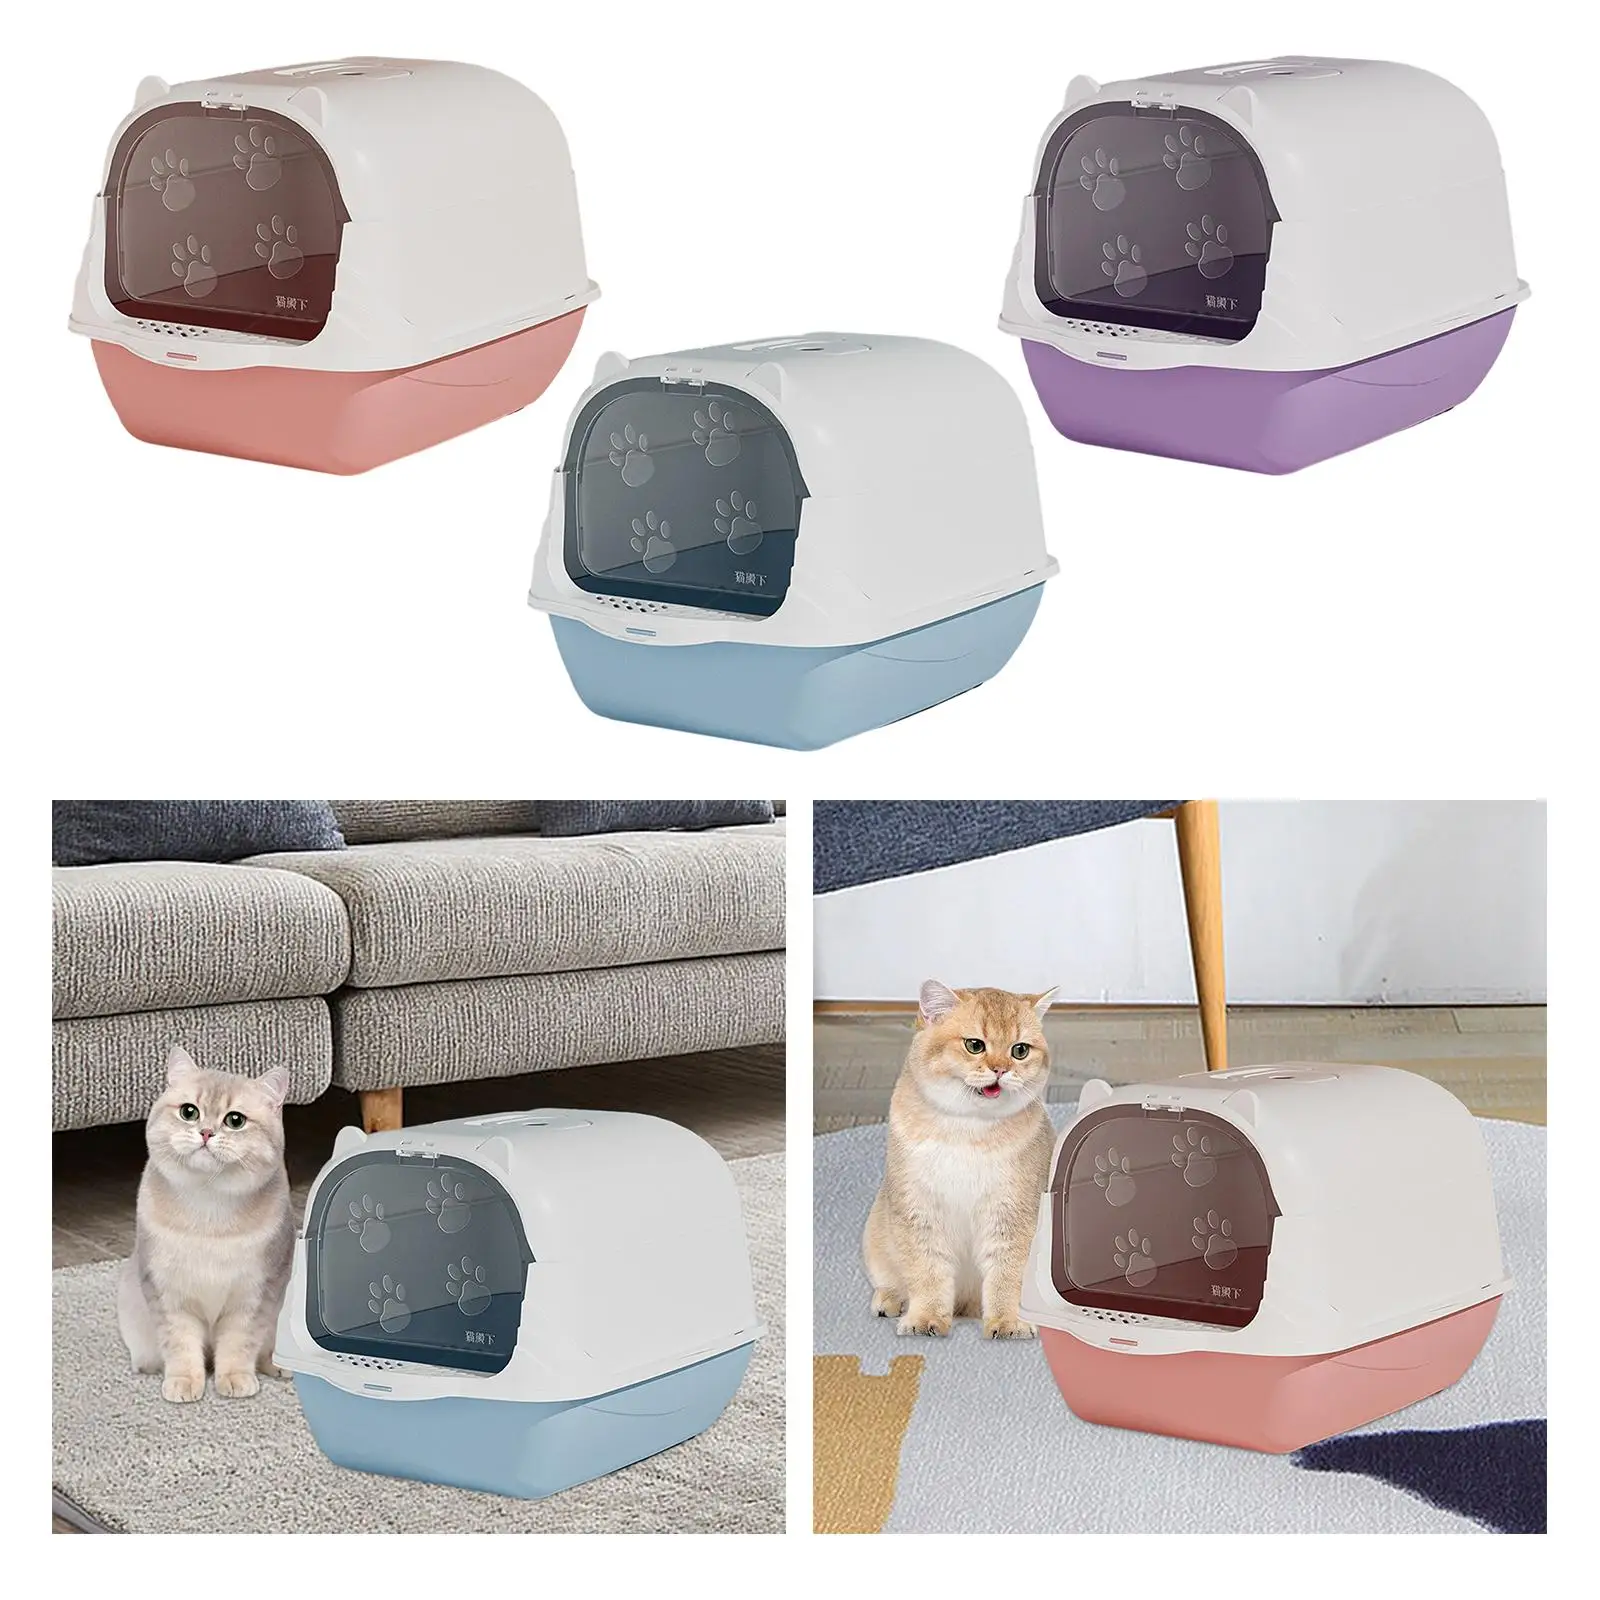 Hooded Cat Litter Box Litter Tray Enclosed Cat Toilet with Cat Litter Shovel Durable Pet Litter Box with Lid Pet Supplies